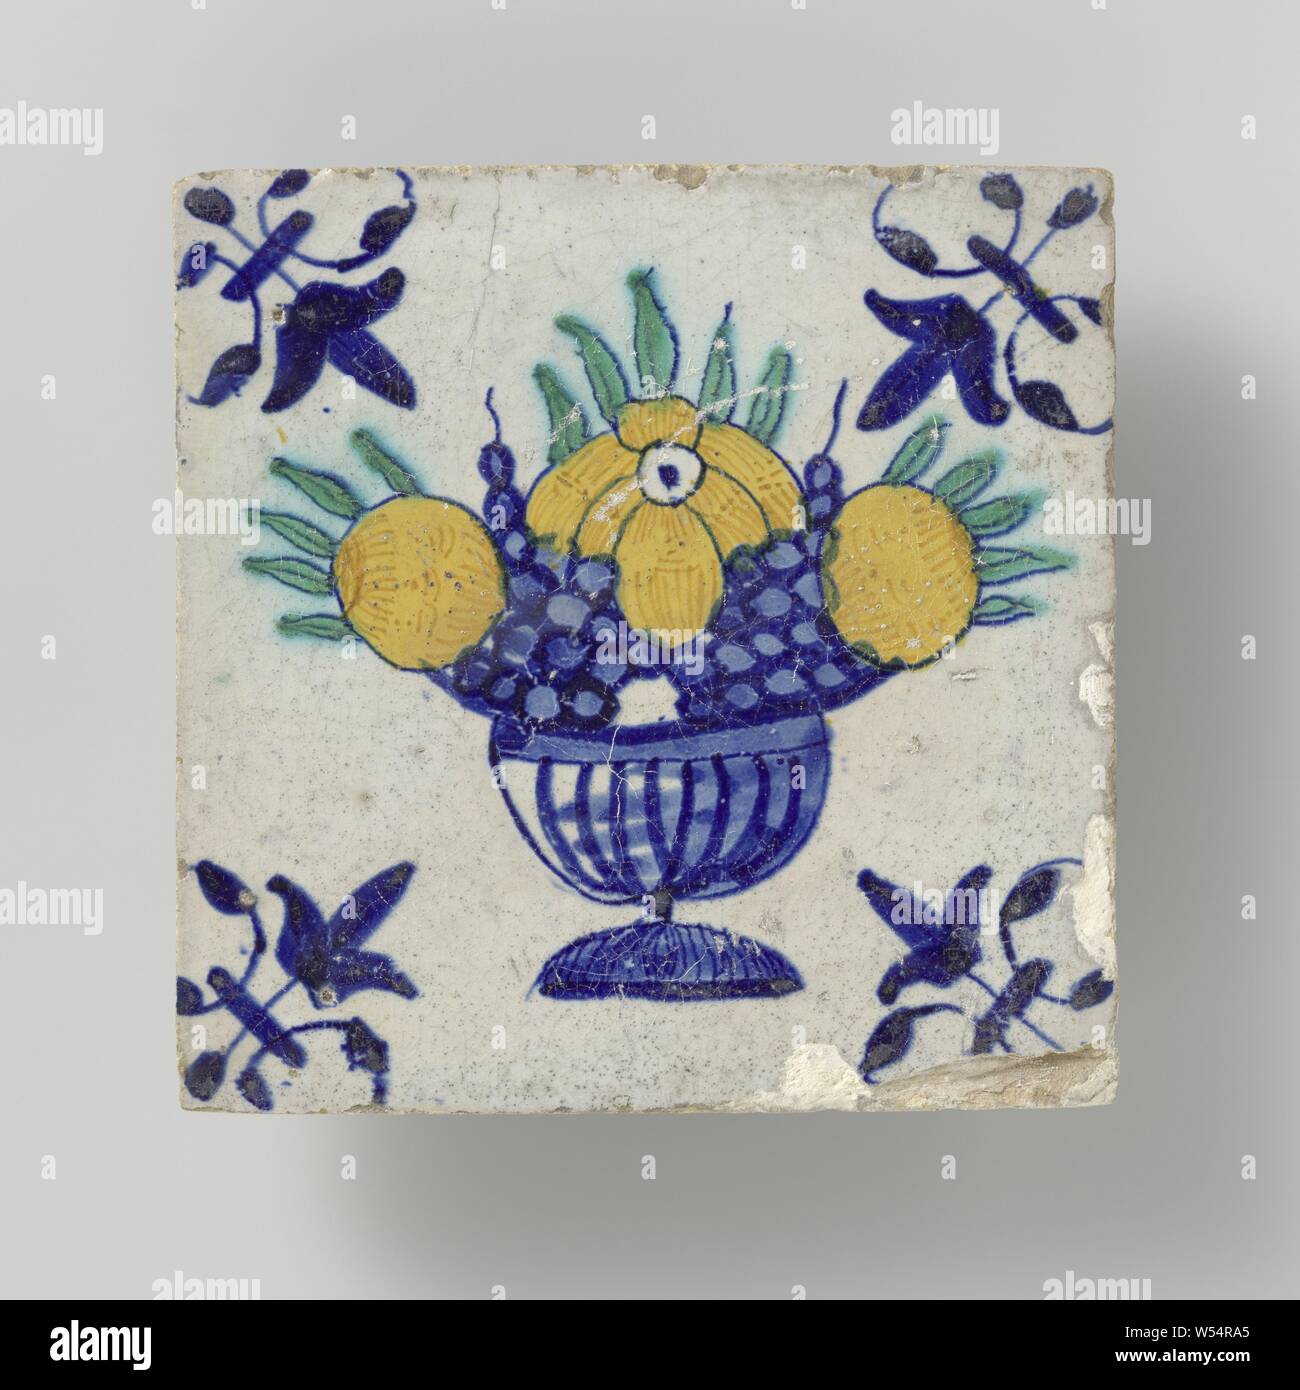 Tile with fruit basket, Tile with a multicolored (blue, green, orange and yellow) fruit basket. In the corners, a lily., anonymous, Netherlands, c. 1640 - c. 1660, earthenware, tin glaze, h 13 cm × w 13 cm × t 1.5 cm Stock Photo